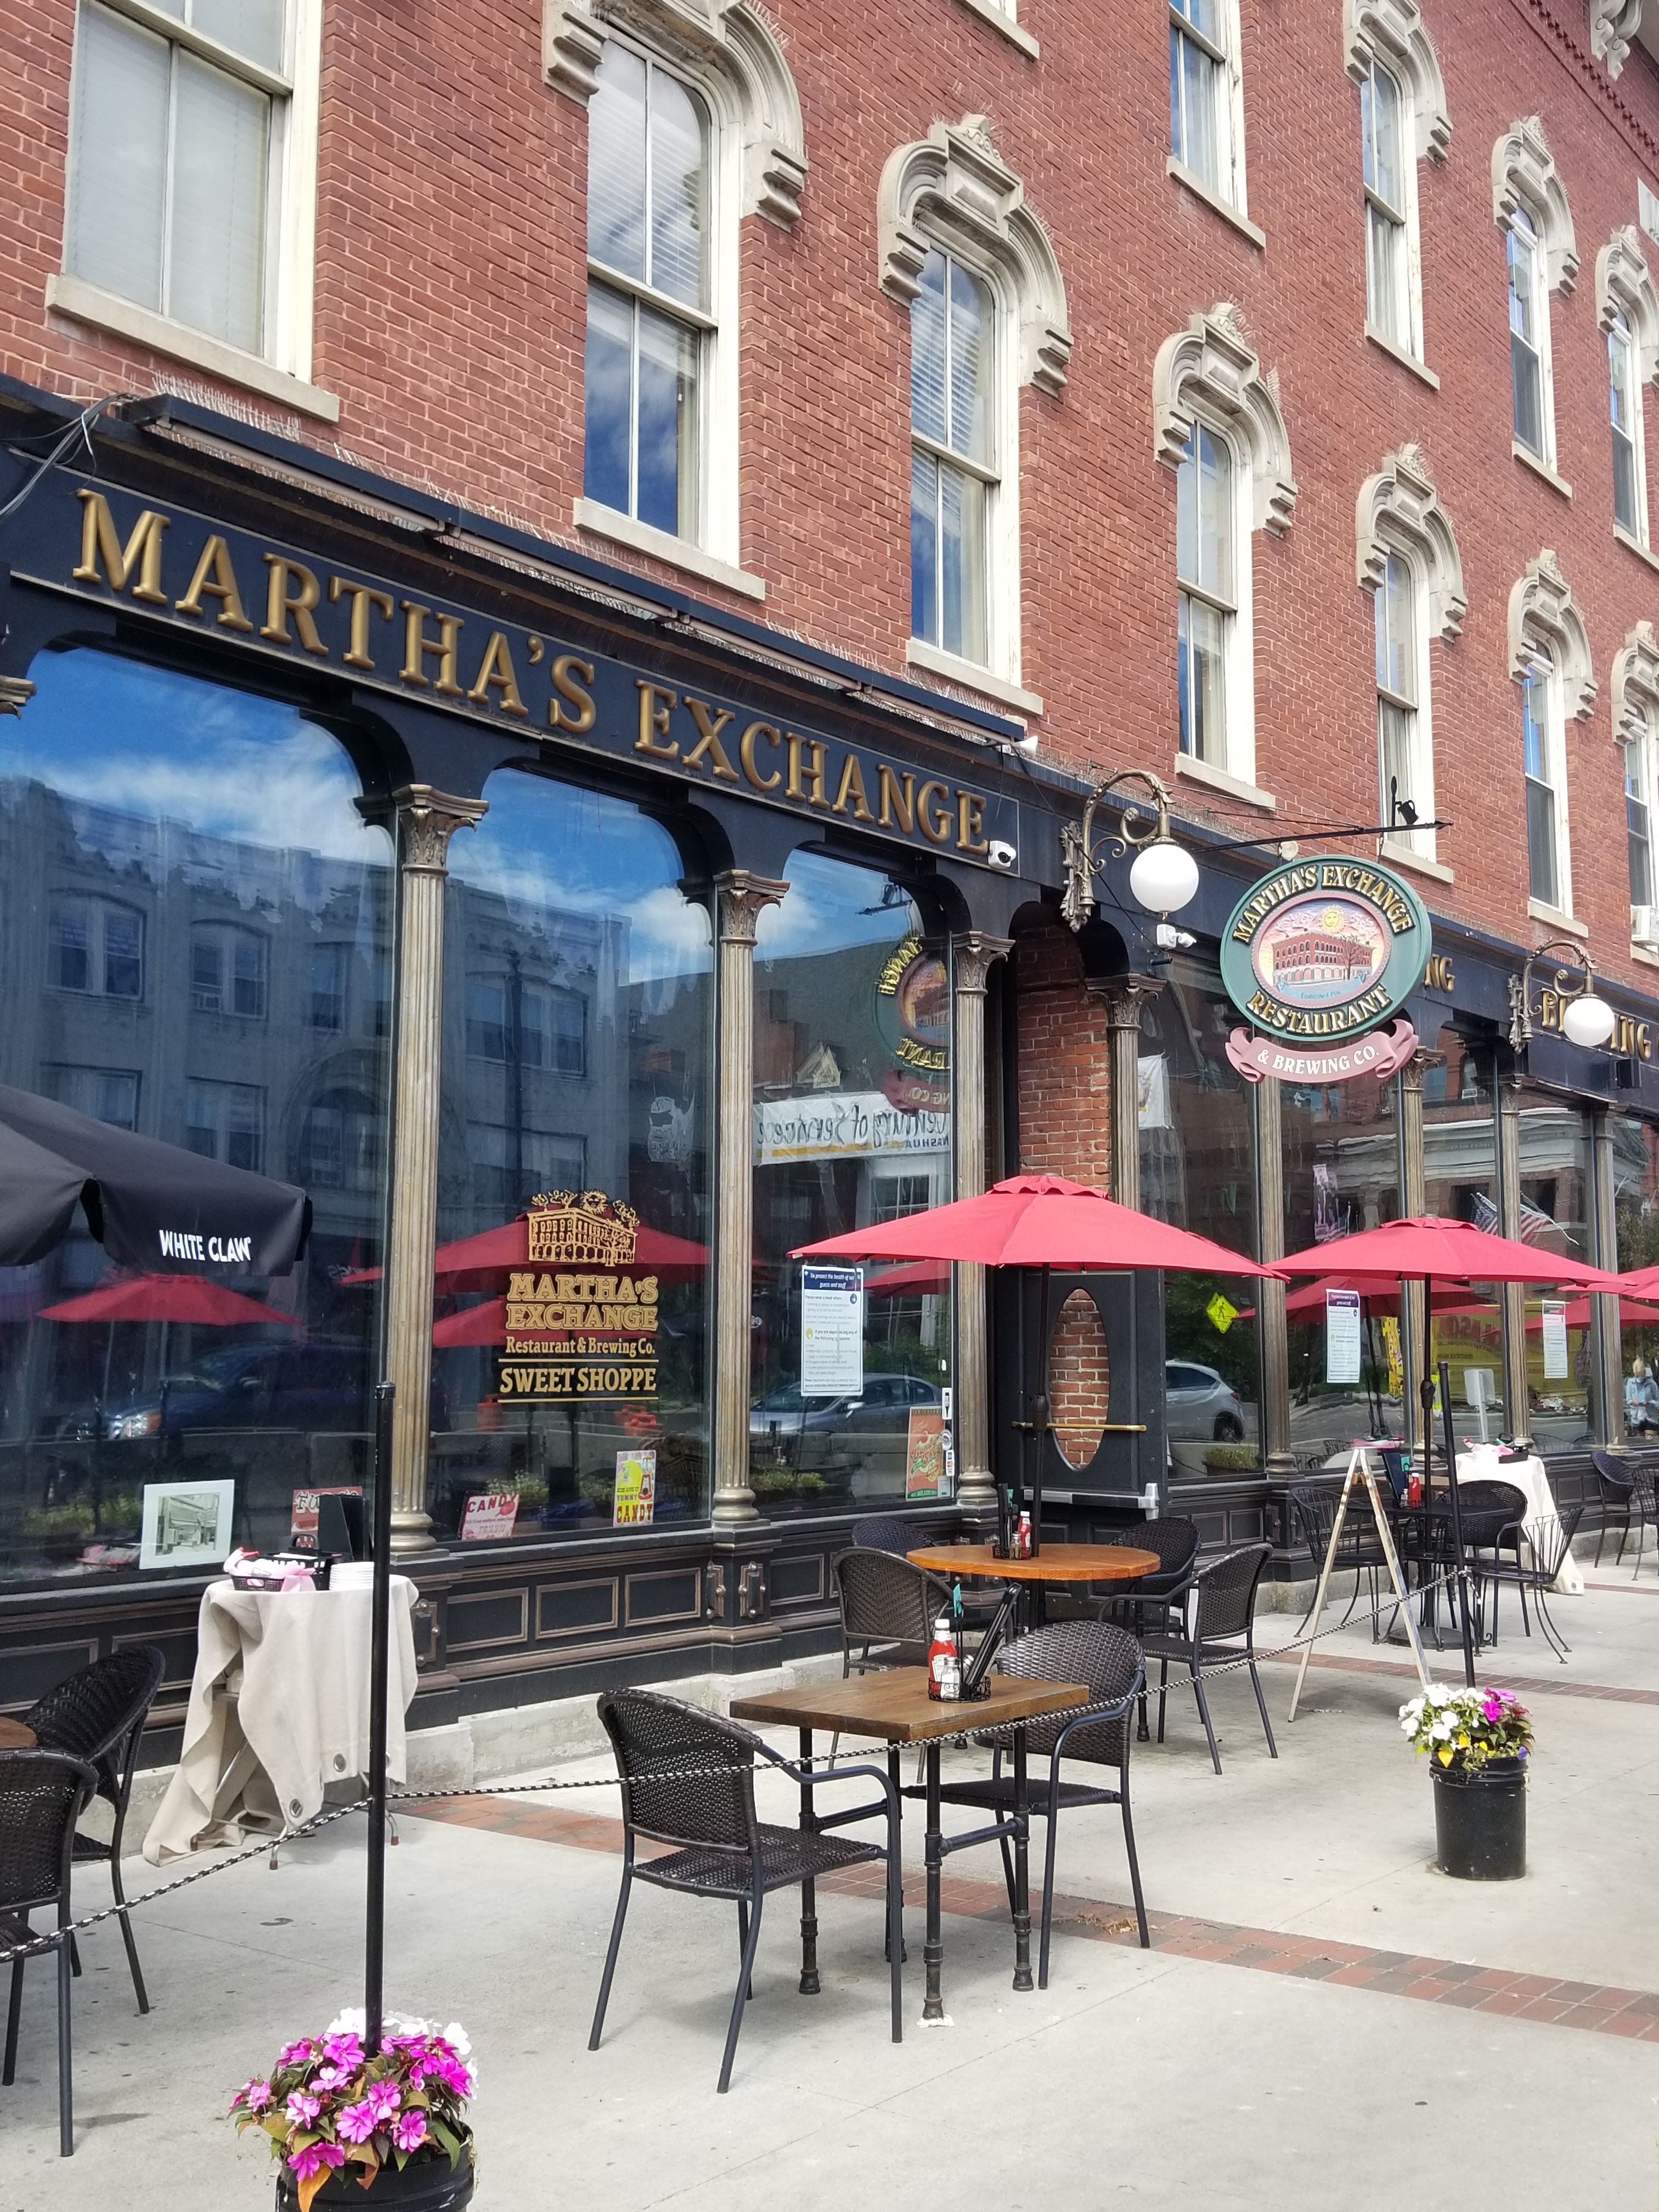 This is a photo of Martha's Exchange and the sidewalk outside the establishment, which contains tables, chairs, umbrellas, and small flower pots that connect a partition separating the area from the rest of the New Hampshire sidewalk, presented by Nashua personal injury lawyer Attorney Buckley